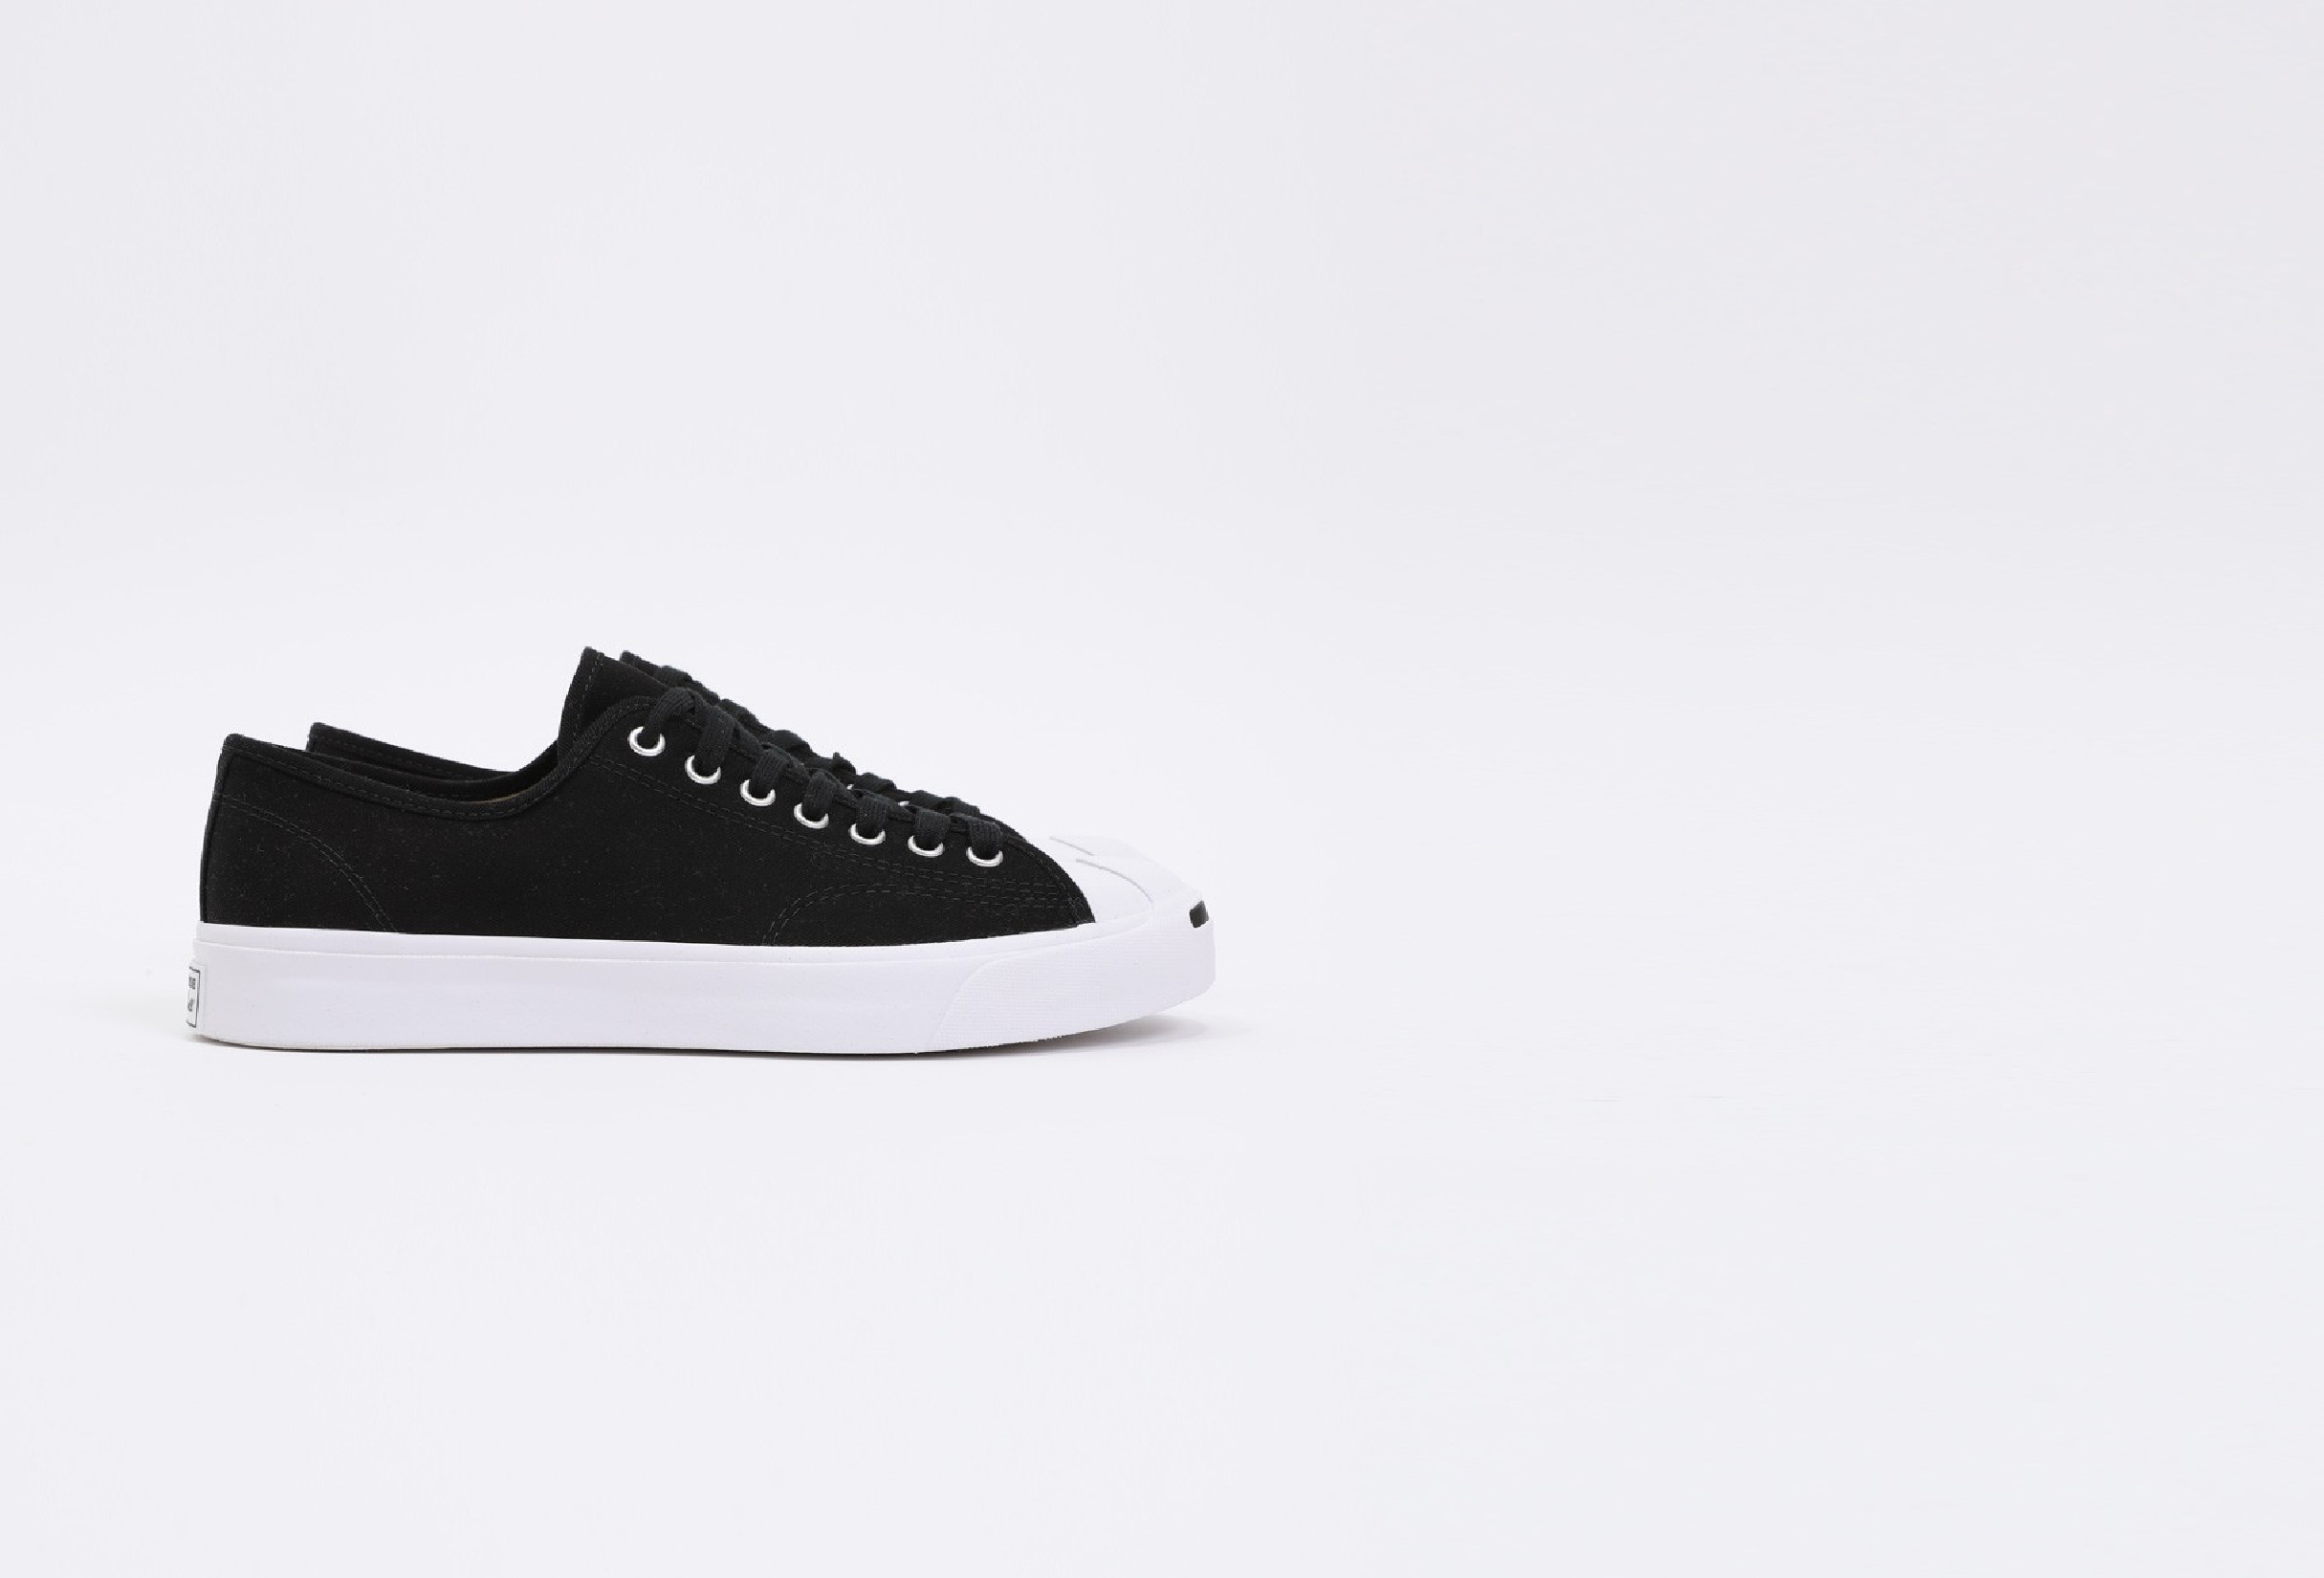 Jack purcell ox Black